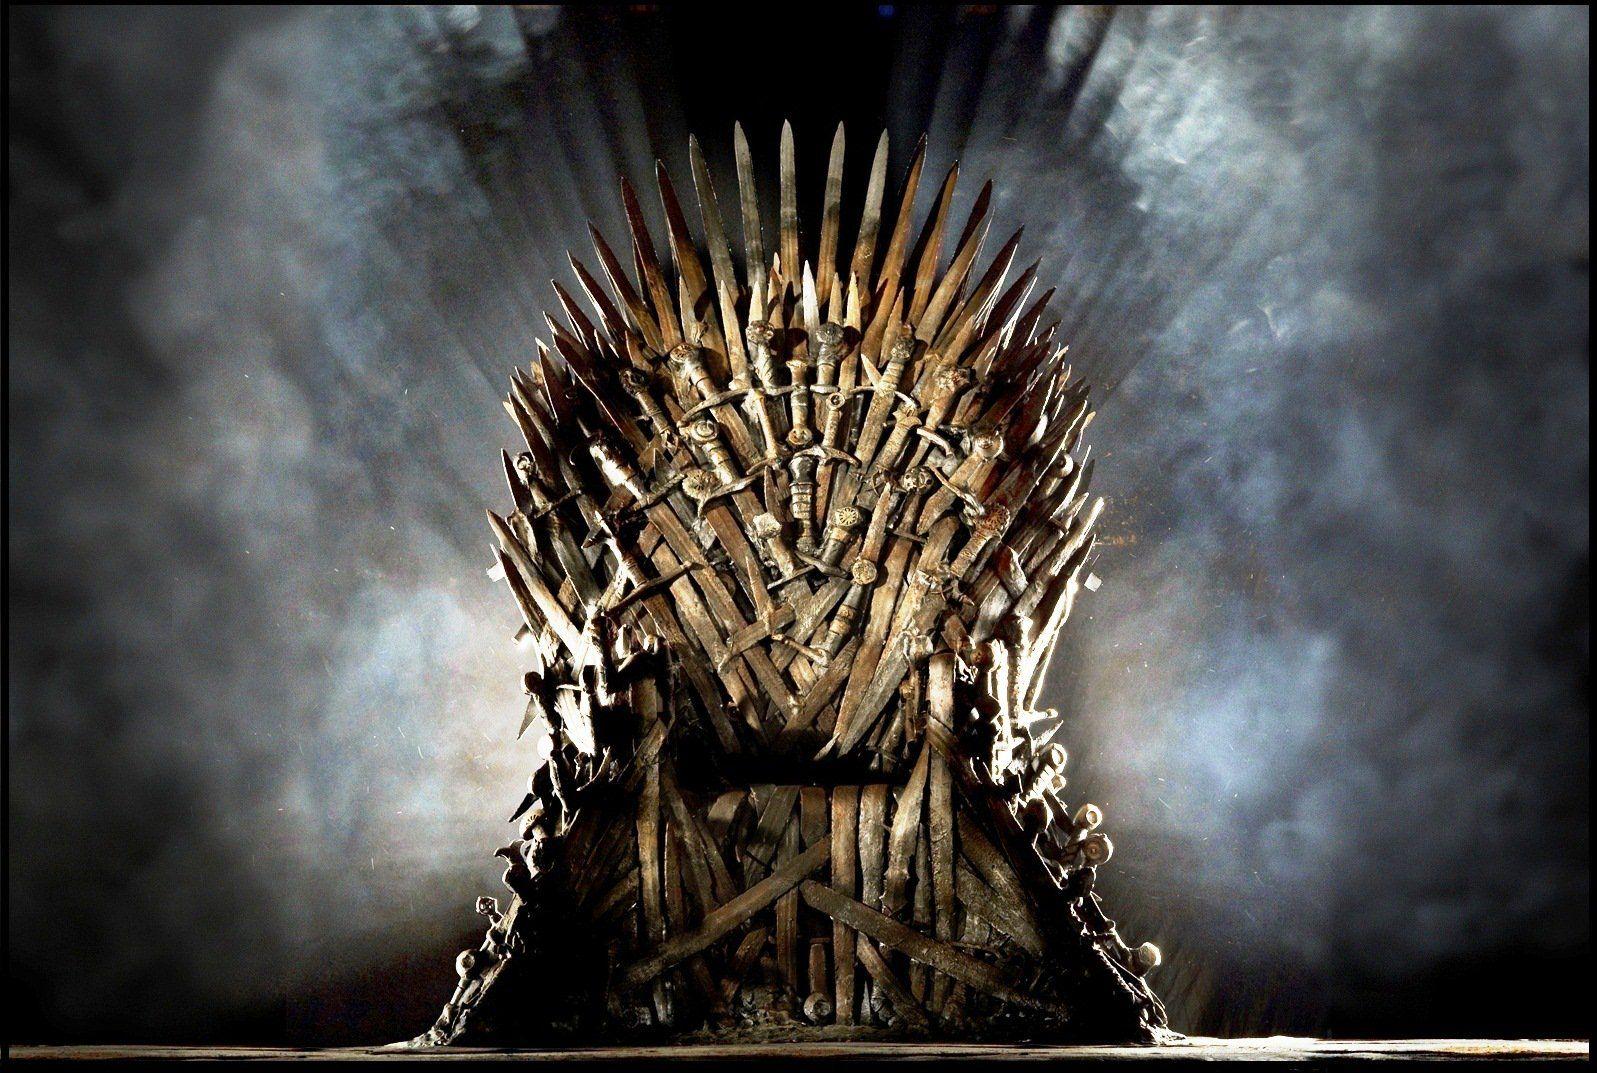 Finally, A Chance To Sit On The Iron Throne